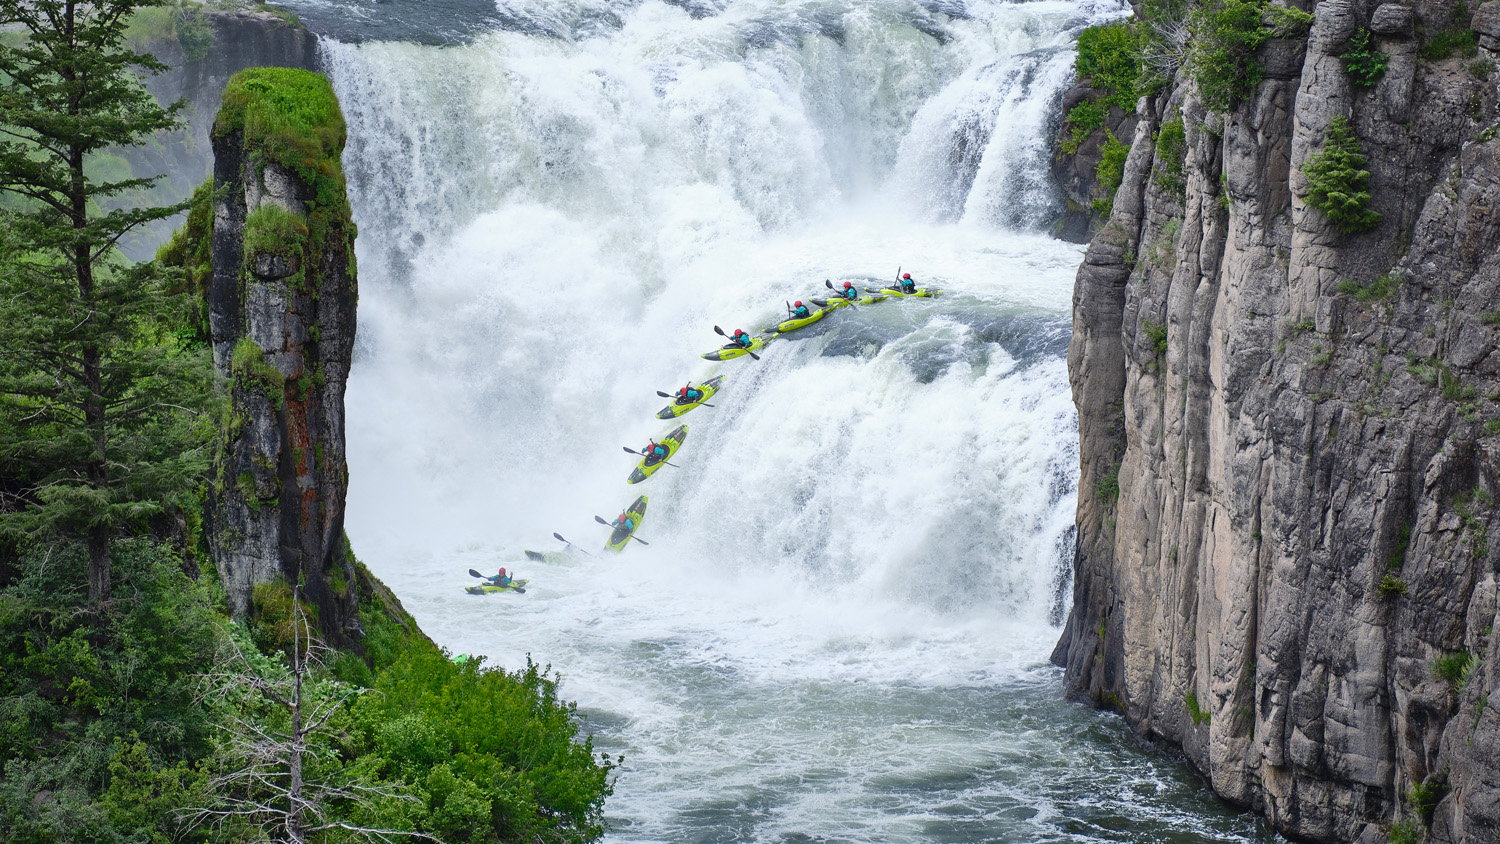 Darby McAdams kayaking Lower Mesa Falls on the Henry's Fork River in Idaho.